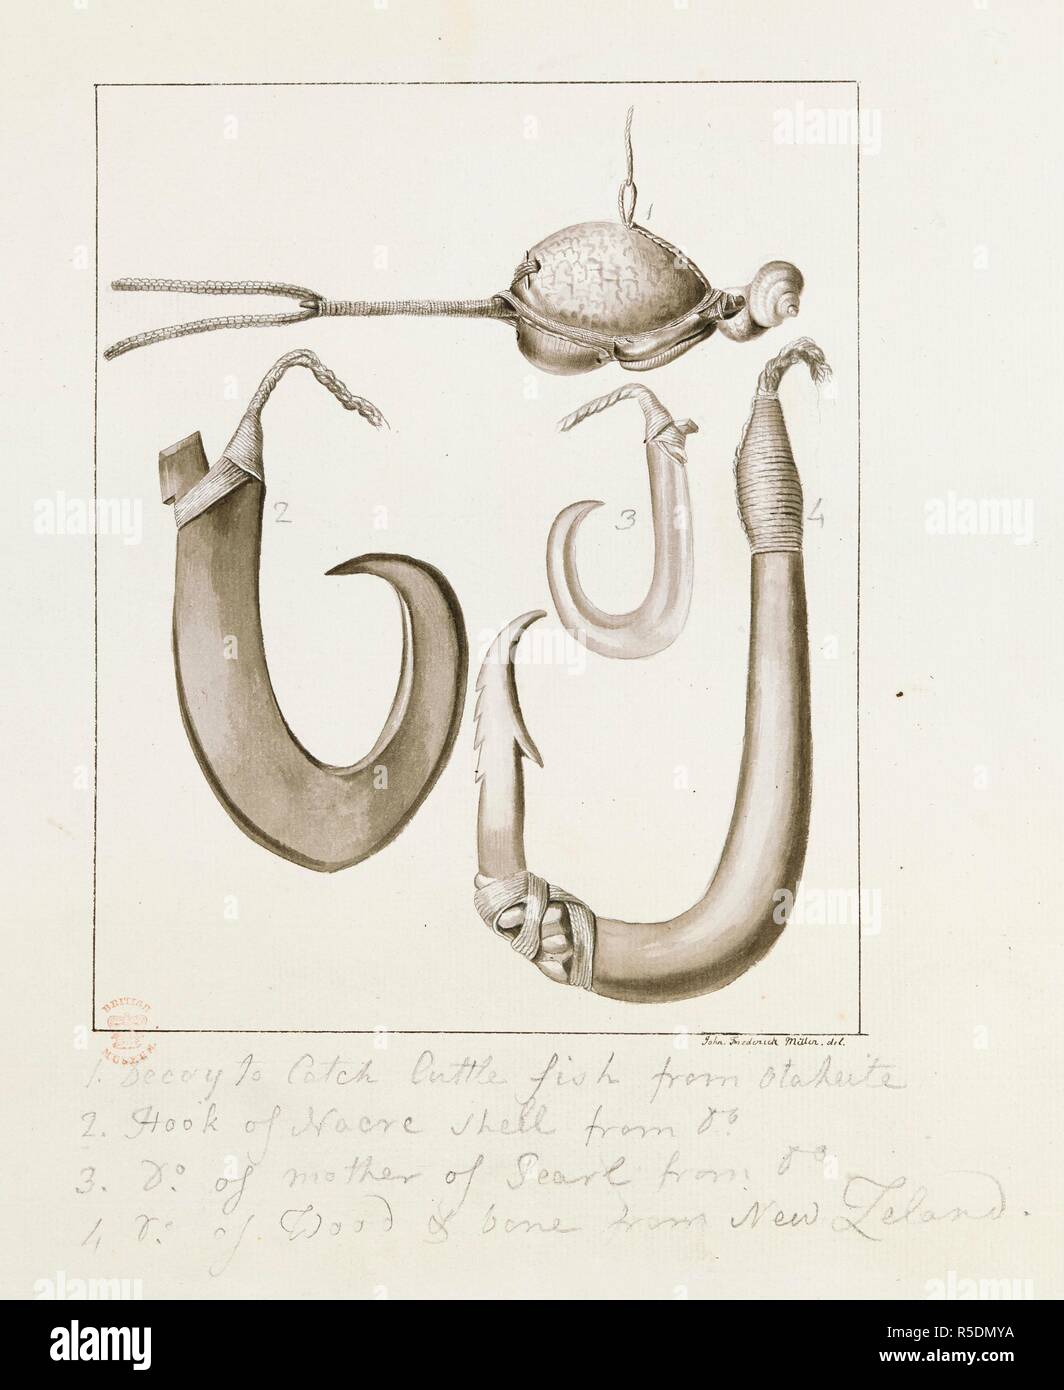 1. Decoy to catch Cuttle fish from Otaheite.  2. Hook of nacre shell from above.  3. Hook of Mother of Pearl from above.  4. Hook of wood and bone from New Zealand. DRAWINGS, in Indian ink, illustrative of Capt. Cook's first voyage, 1768 -1770, chiefly relating to Otaheite and New Zealand, by A. Buchan, John F. Miller, and others. 1768-1770. Source: Add. 15508, no.27. Stock Photo